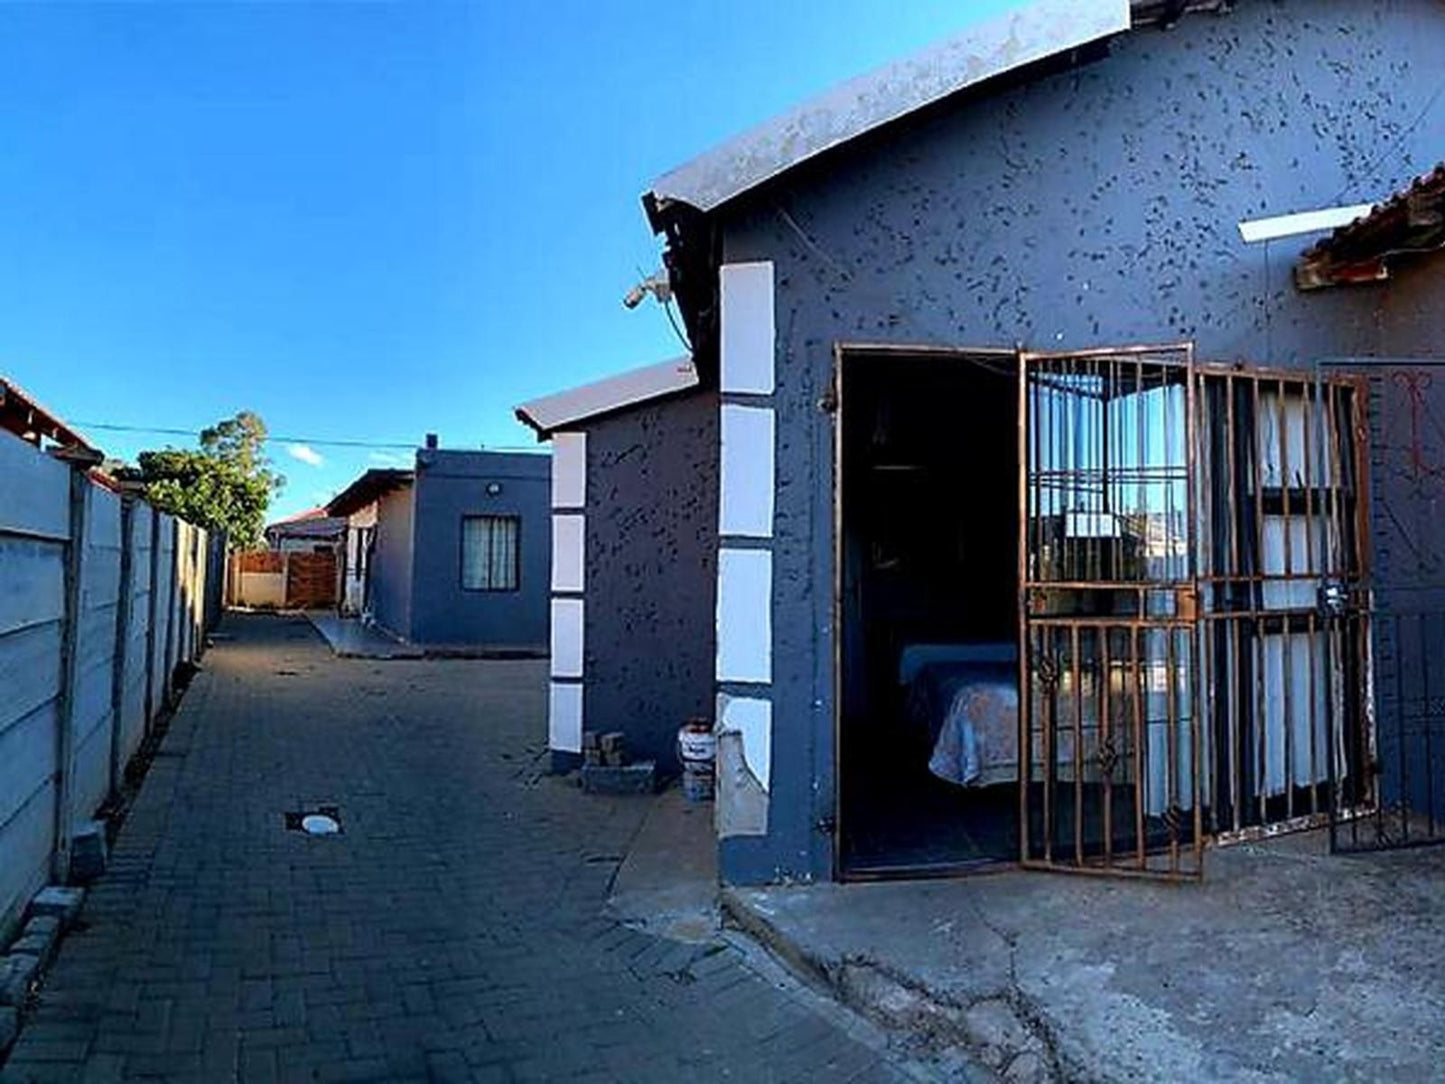 The Village Boiketlo Guest House Generaal De Wet Bloemfontein Free State South Africa House, Building, Architecture, Shipping Container